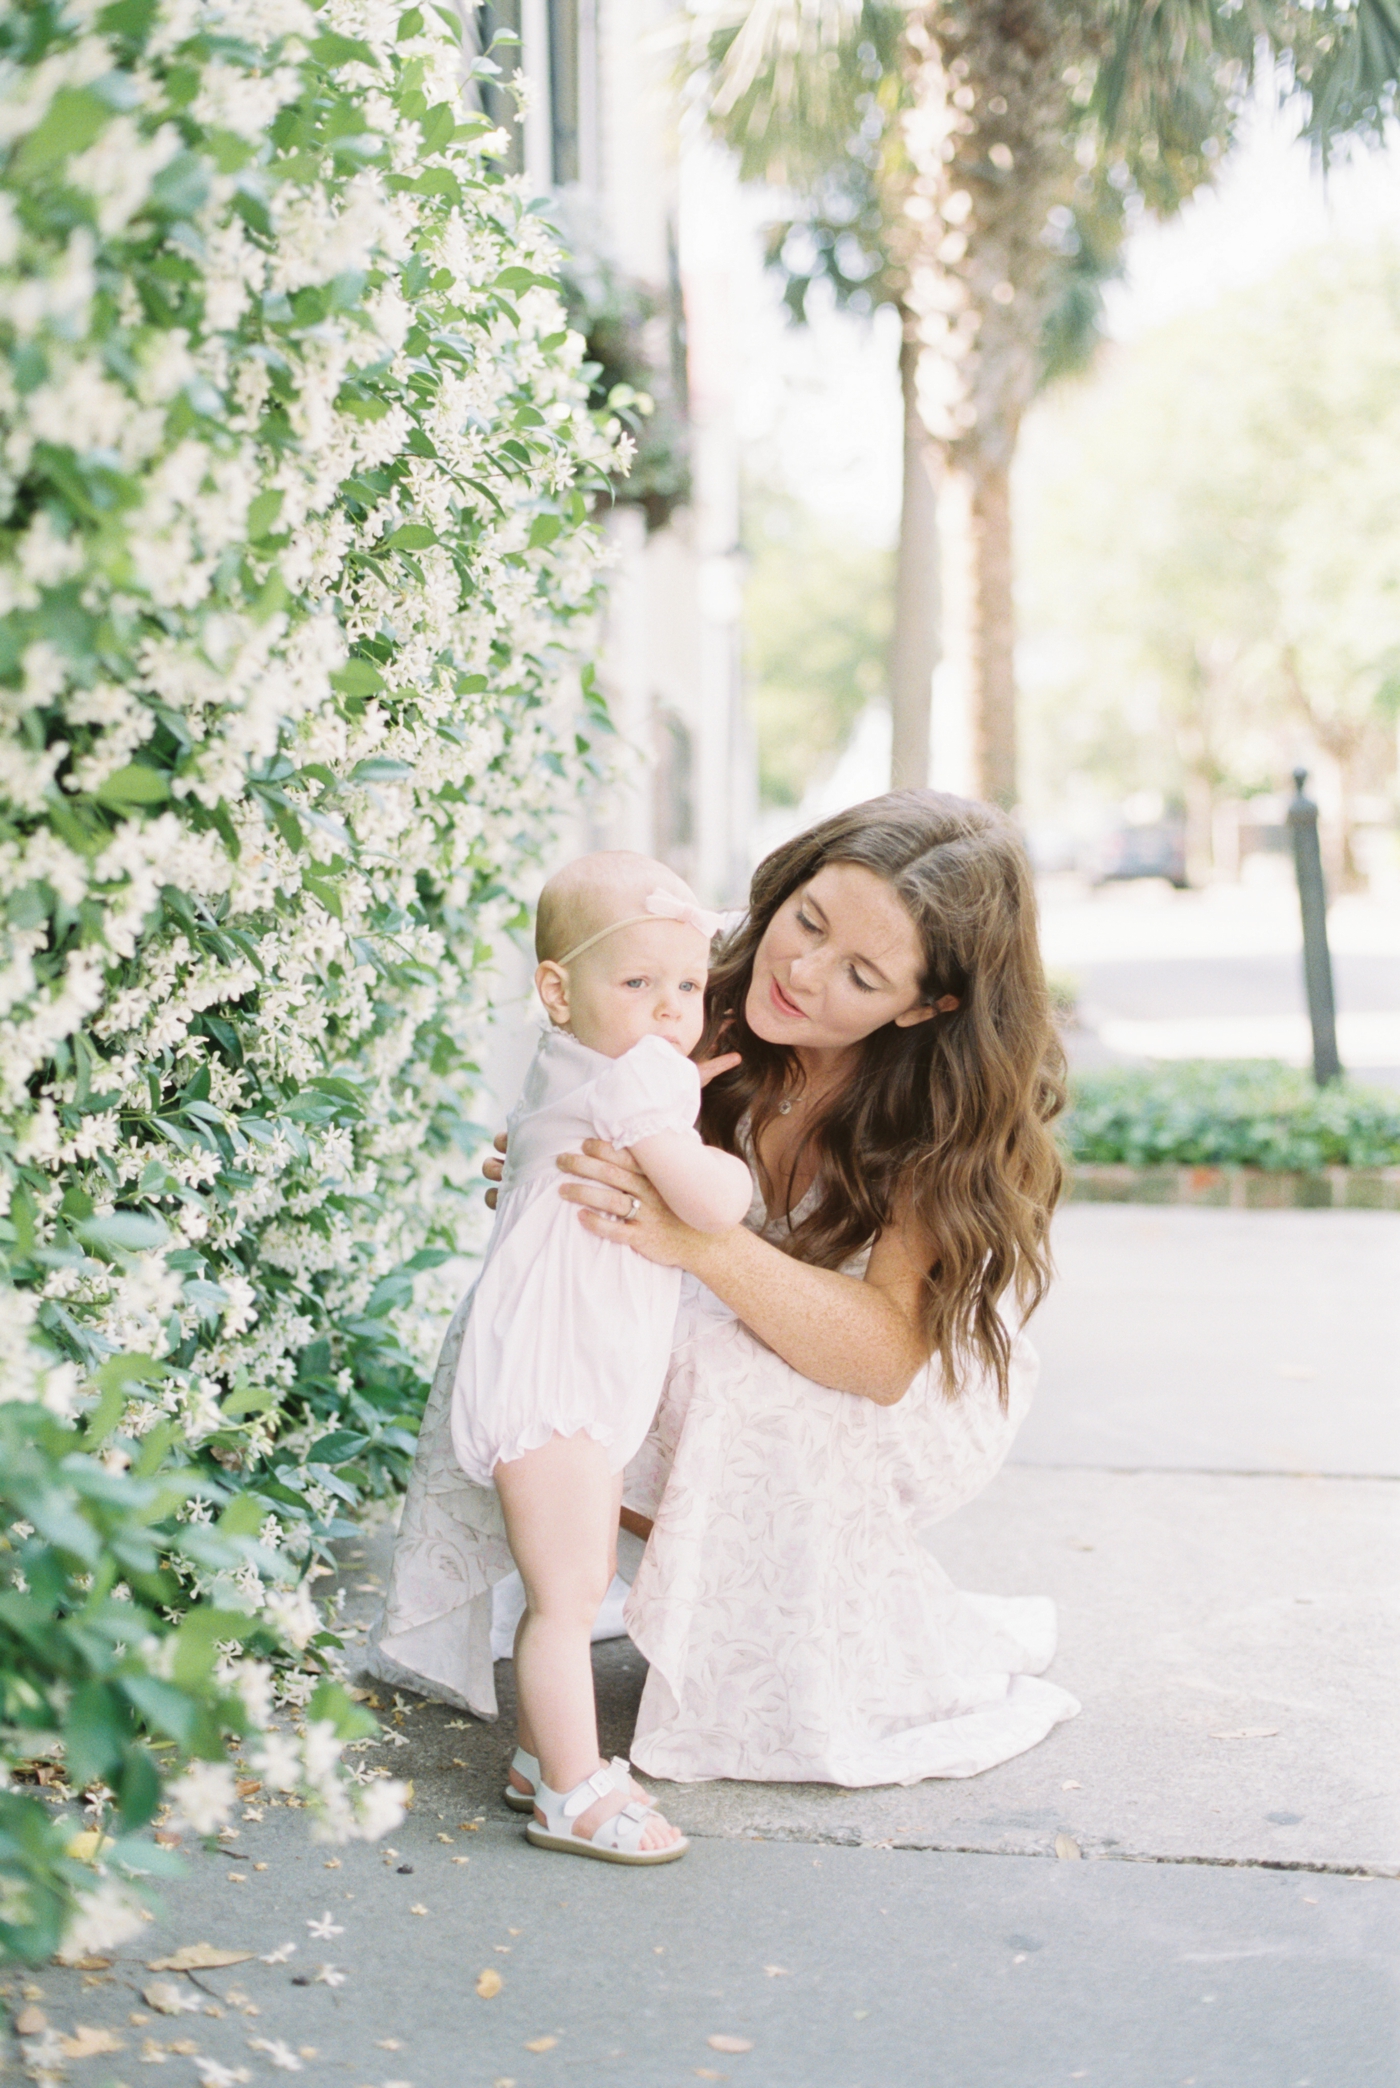 Mom chatting with baby daughter during 18month photo session downtown charleston | Photo by Caitlyn Motycka Photography.